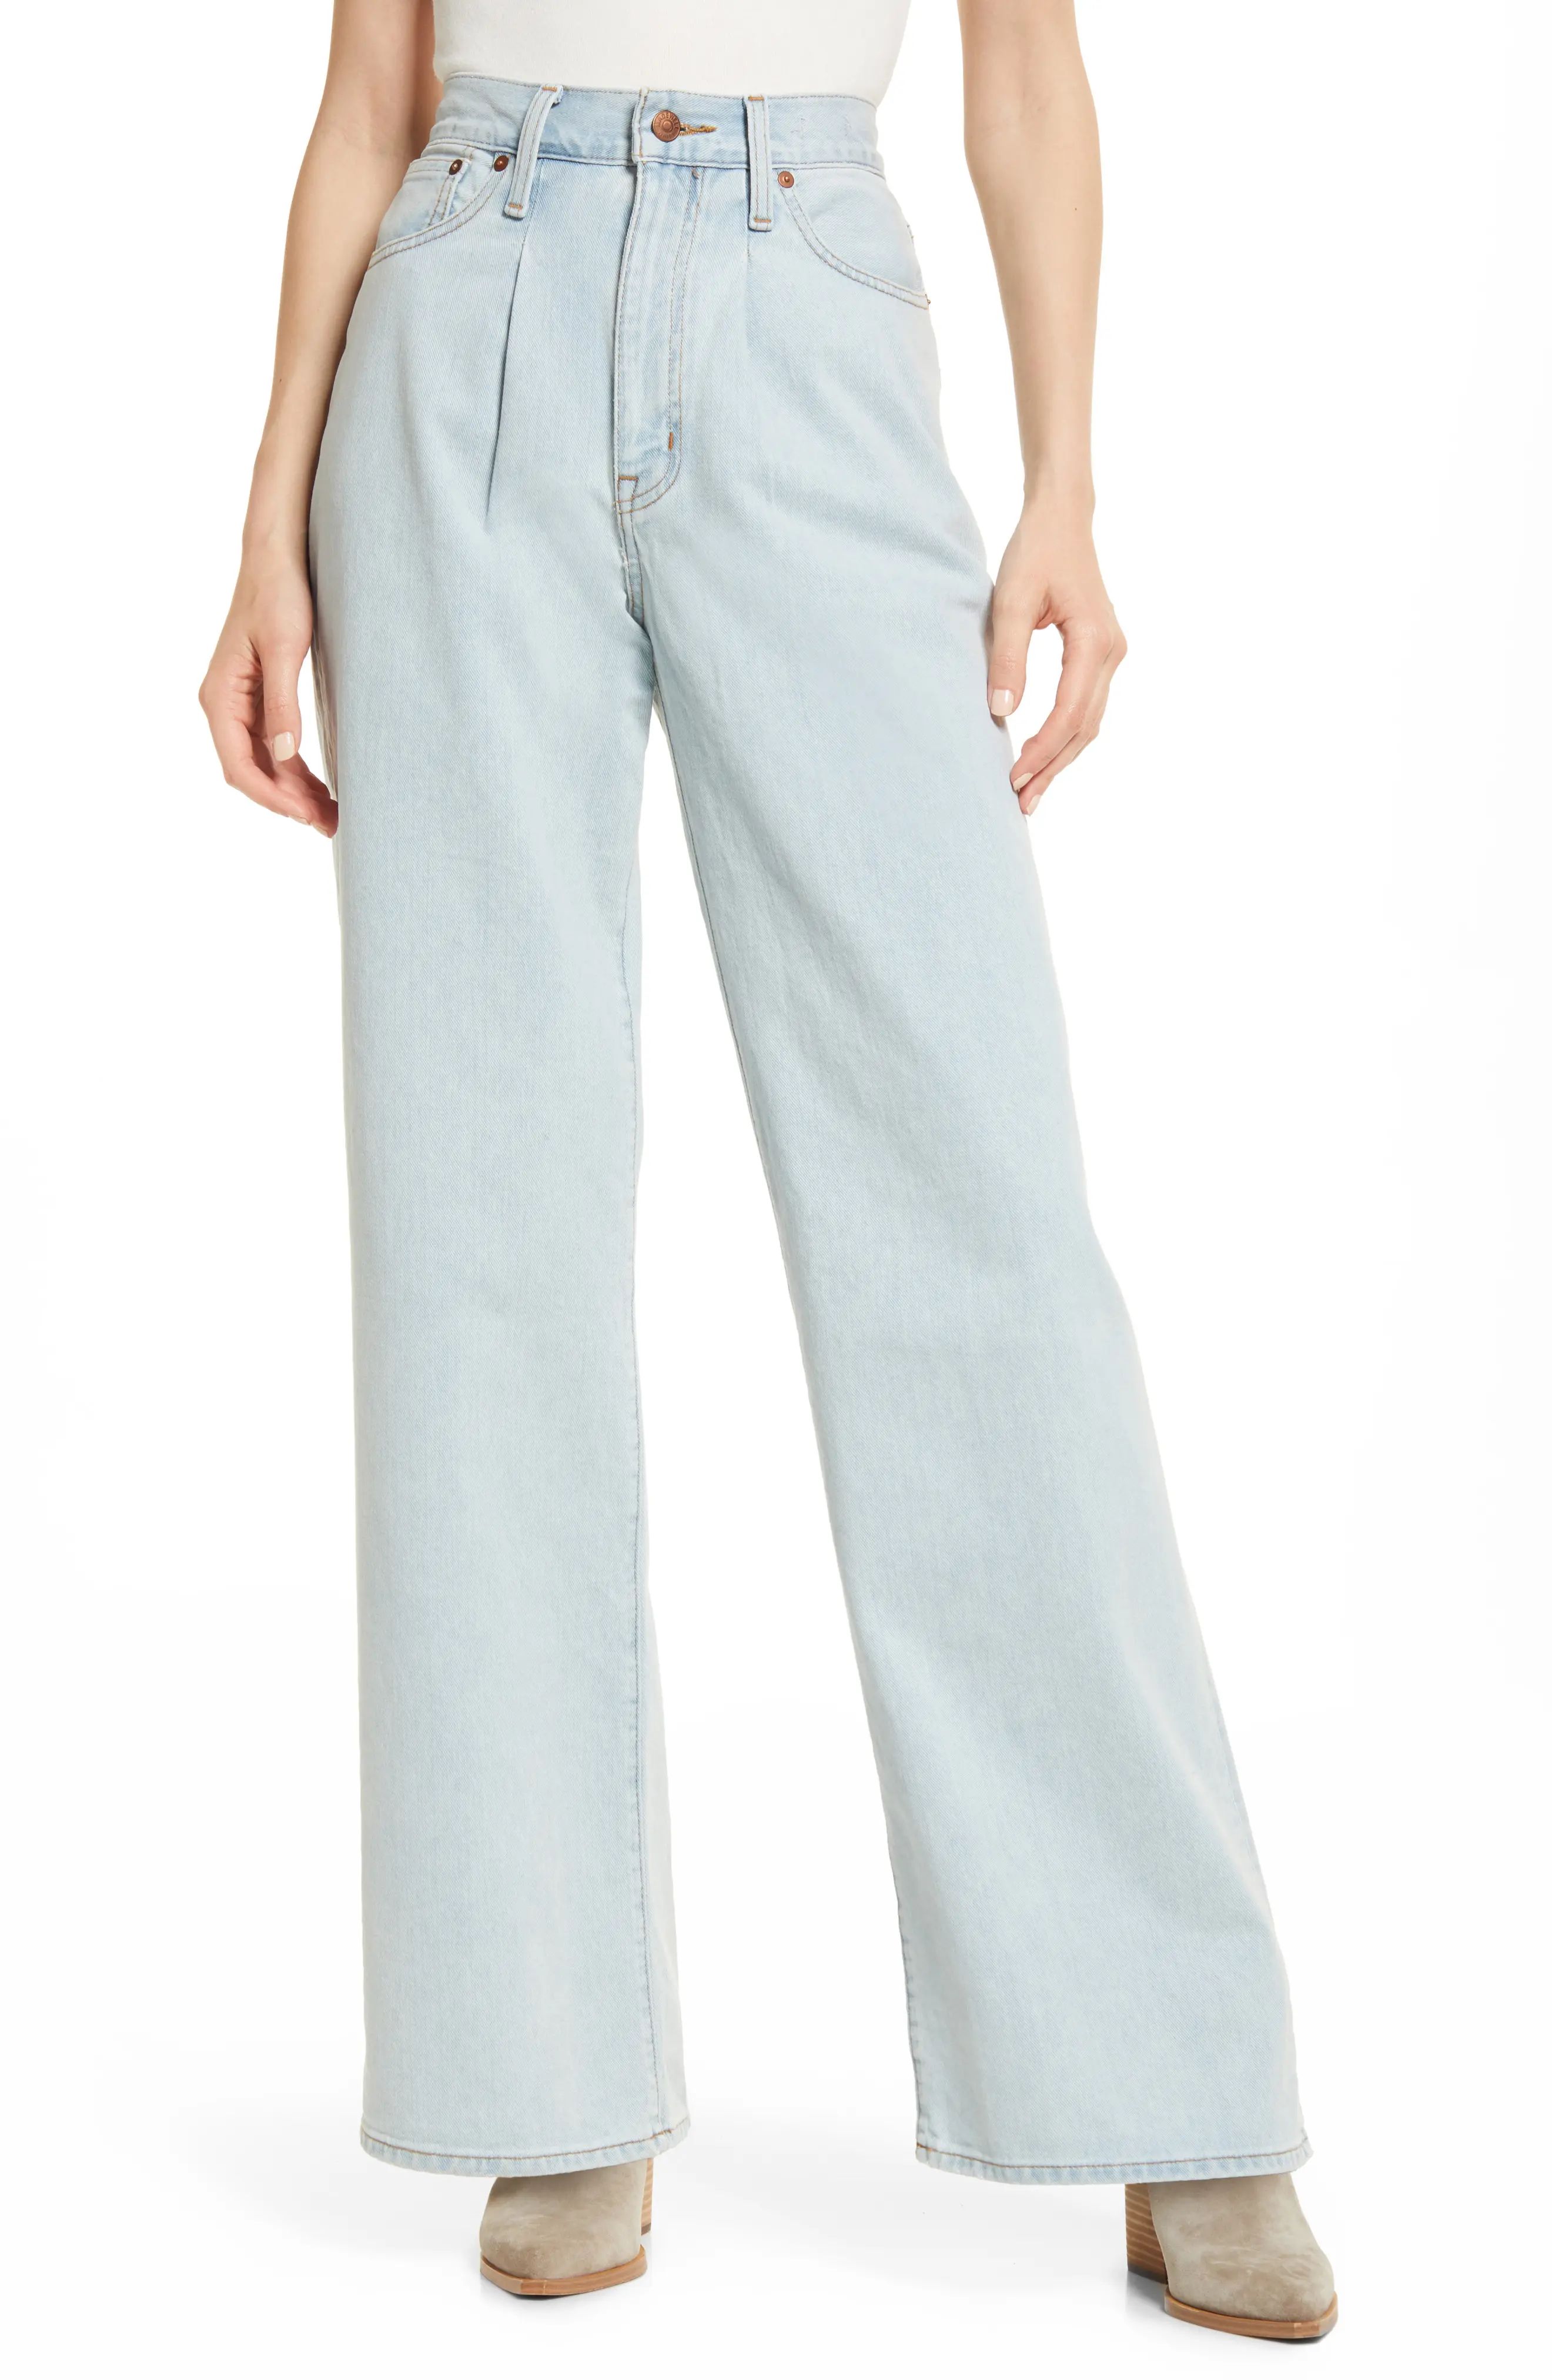 Madewell Madwell Super Wide Leg Jeans in Olcott Wash at Nordstrom, Size 23 | Nordstrom